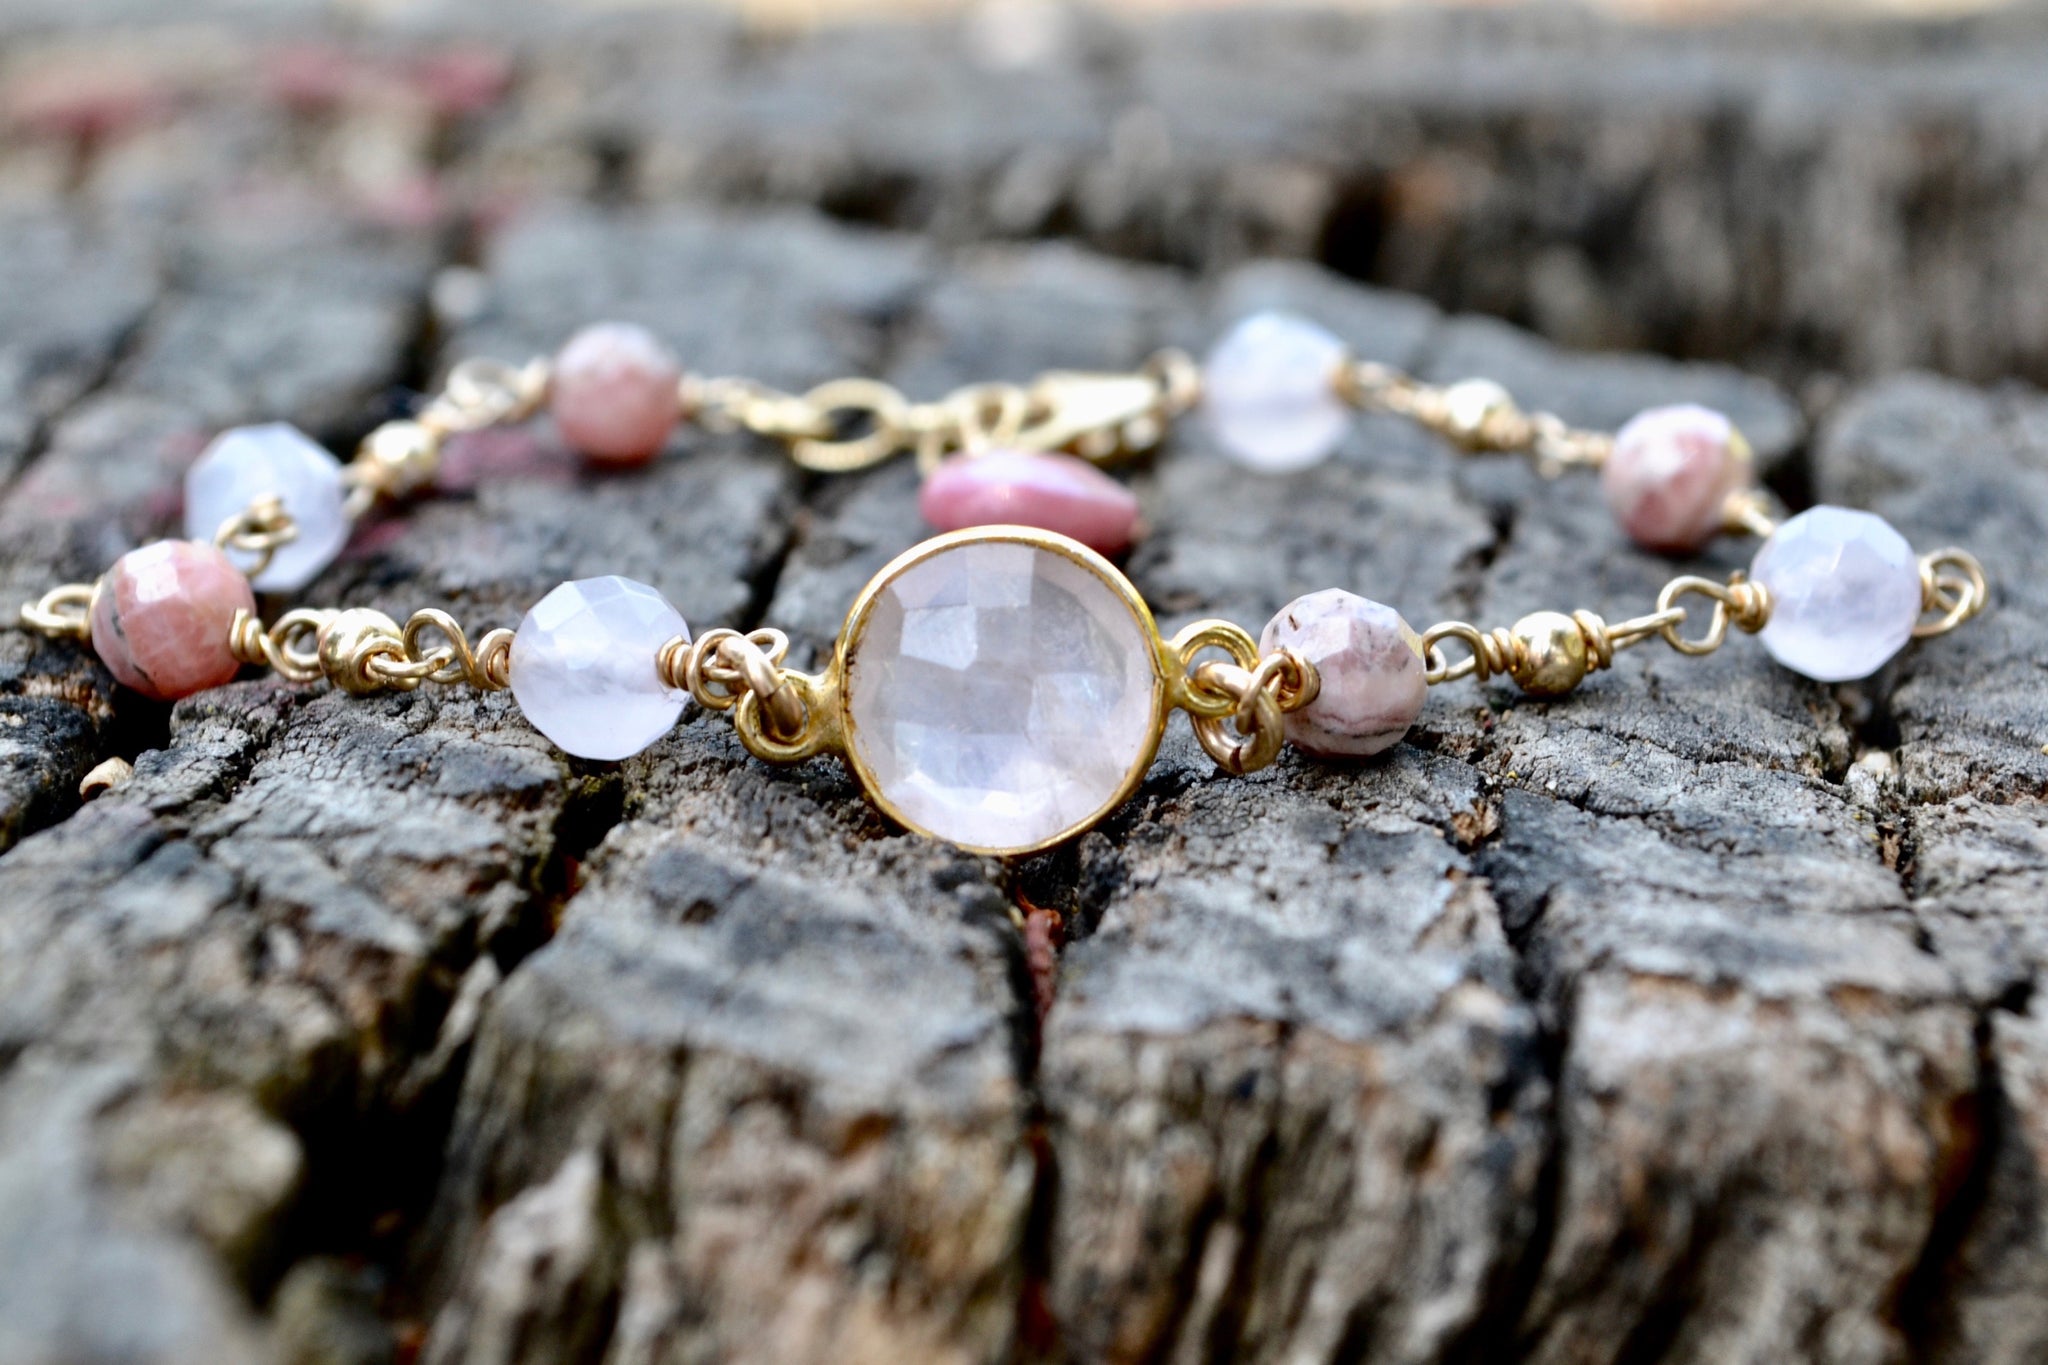 Natural Genuine Rhodonite Crystal Bead Bracelet 8mm, Genuine Rhodonite  Gemstone Bracelet, Provide Peace and Compassion